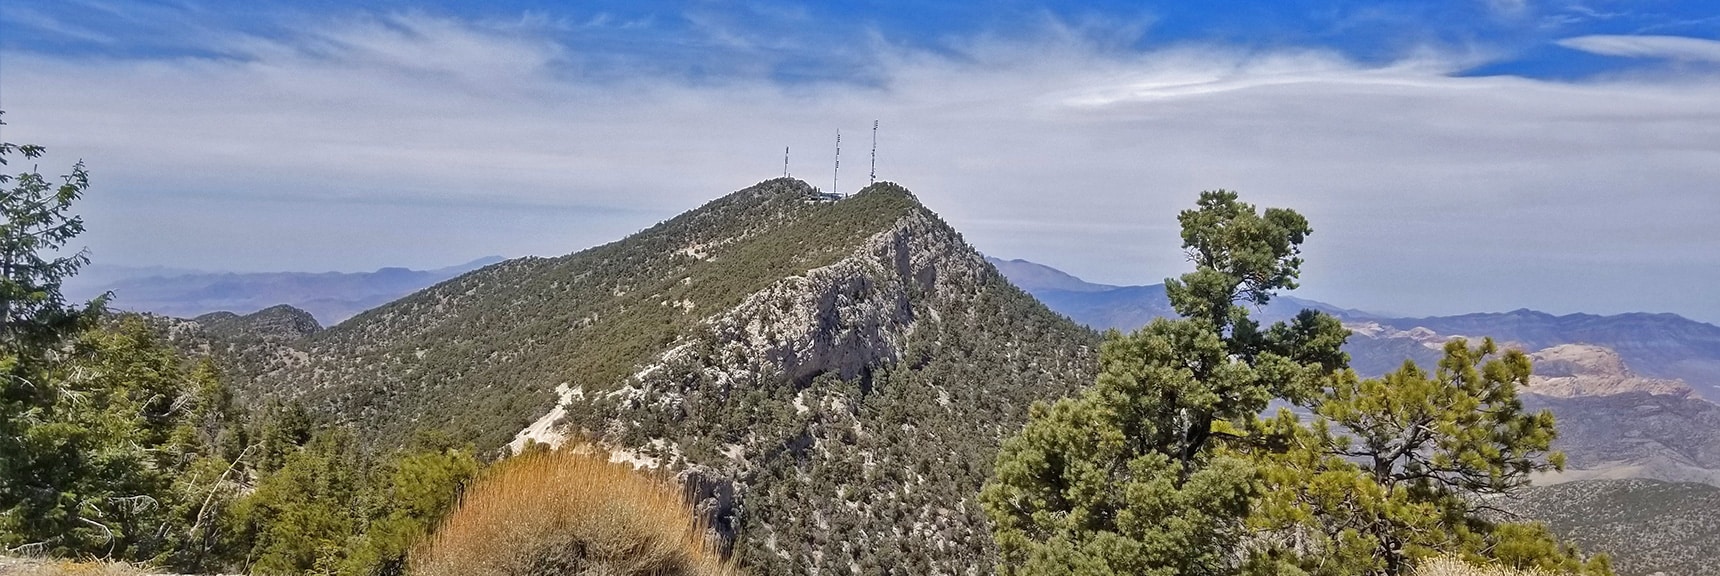 North Summit Viewed from the Mid-Summit. | Potosi Mountain Spring Mountains Nevada